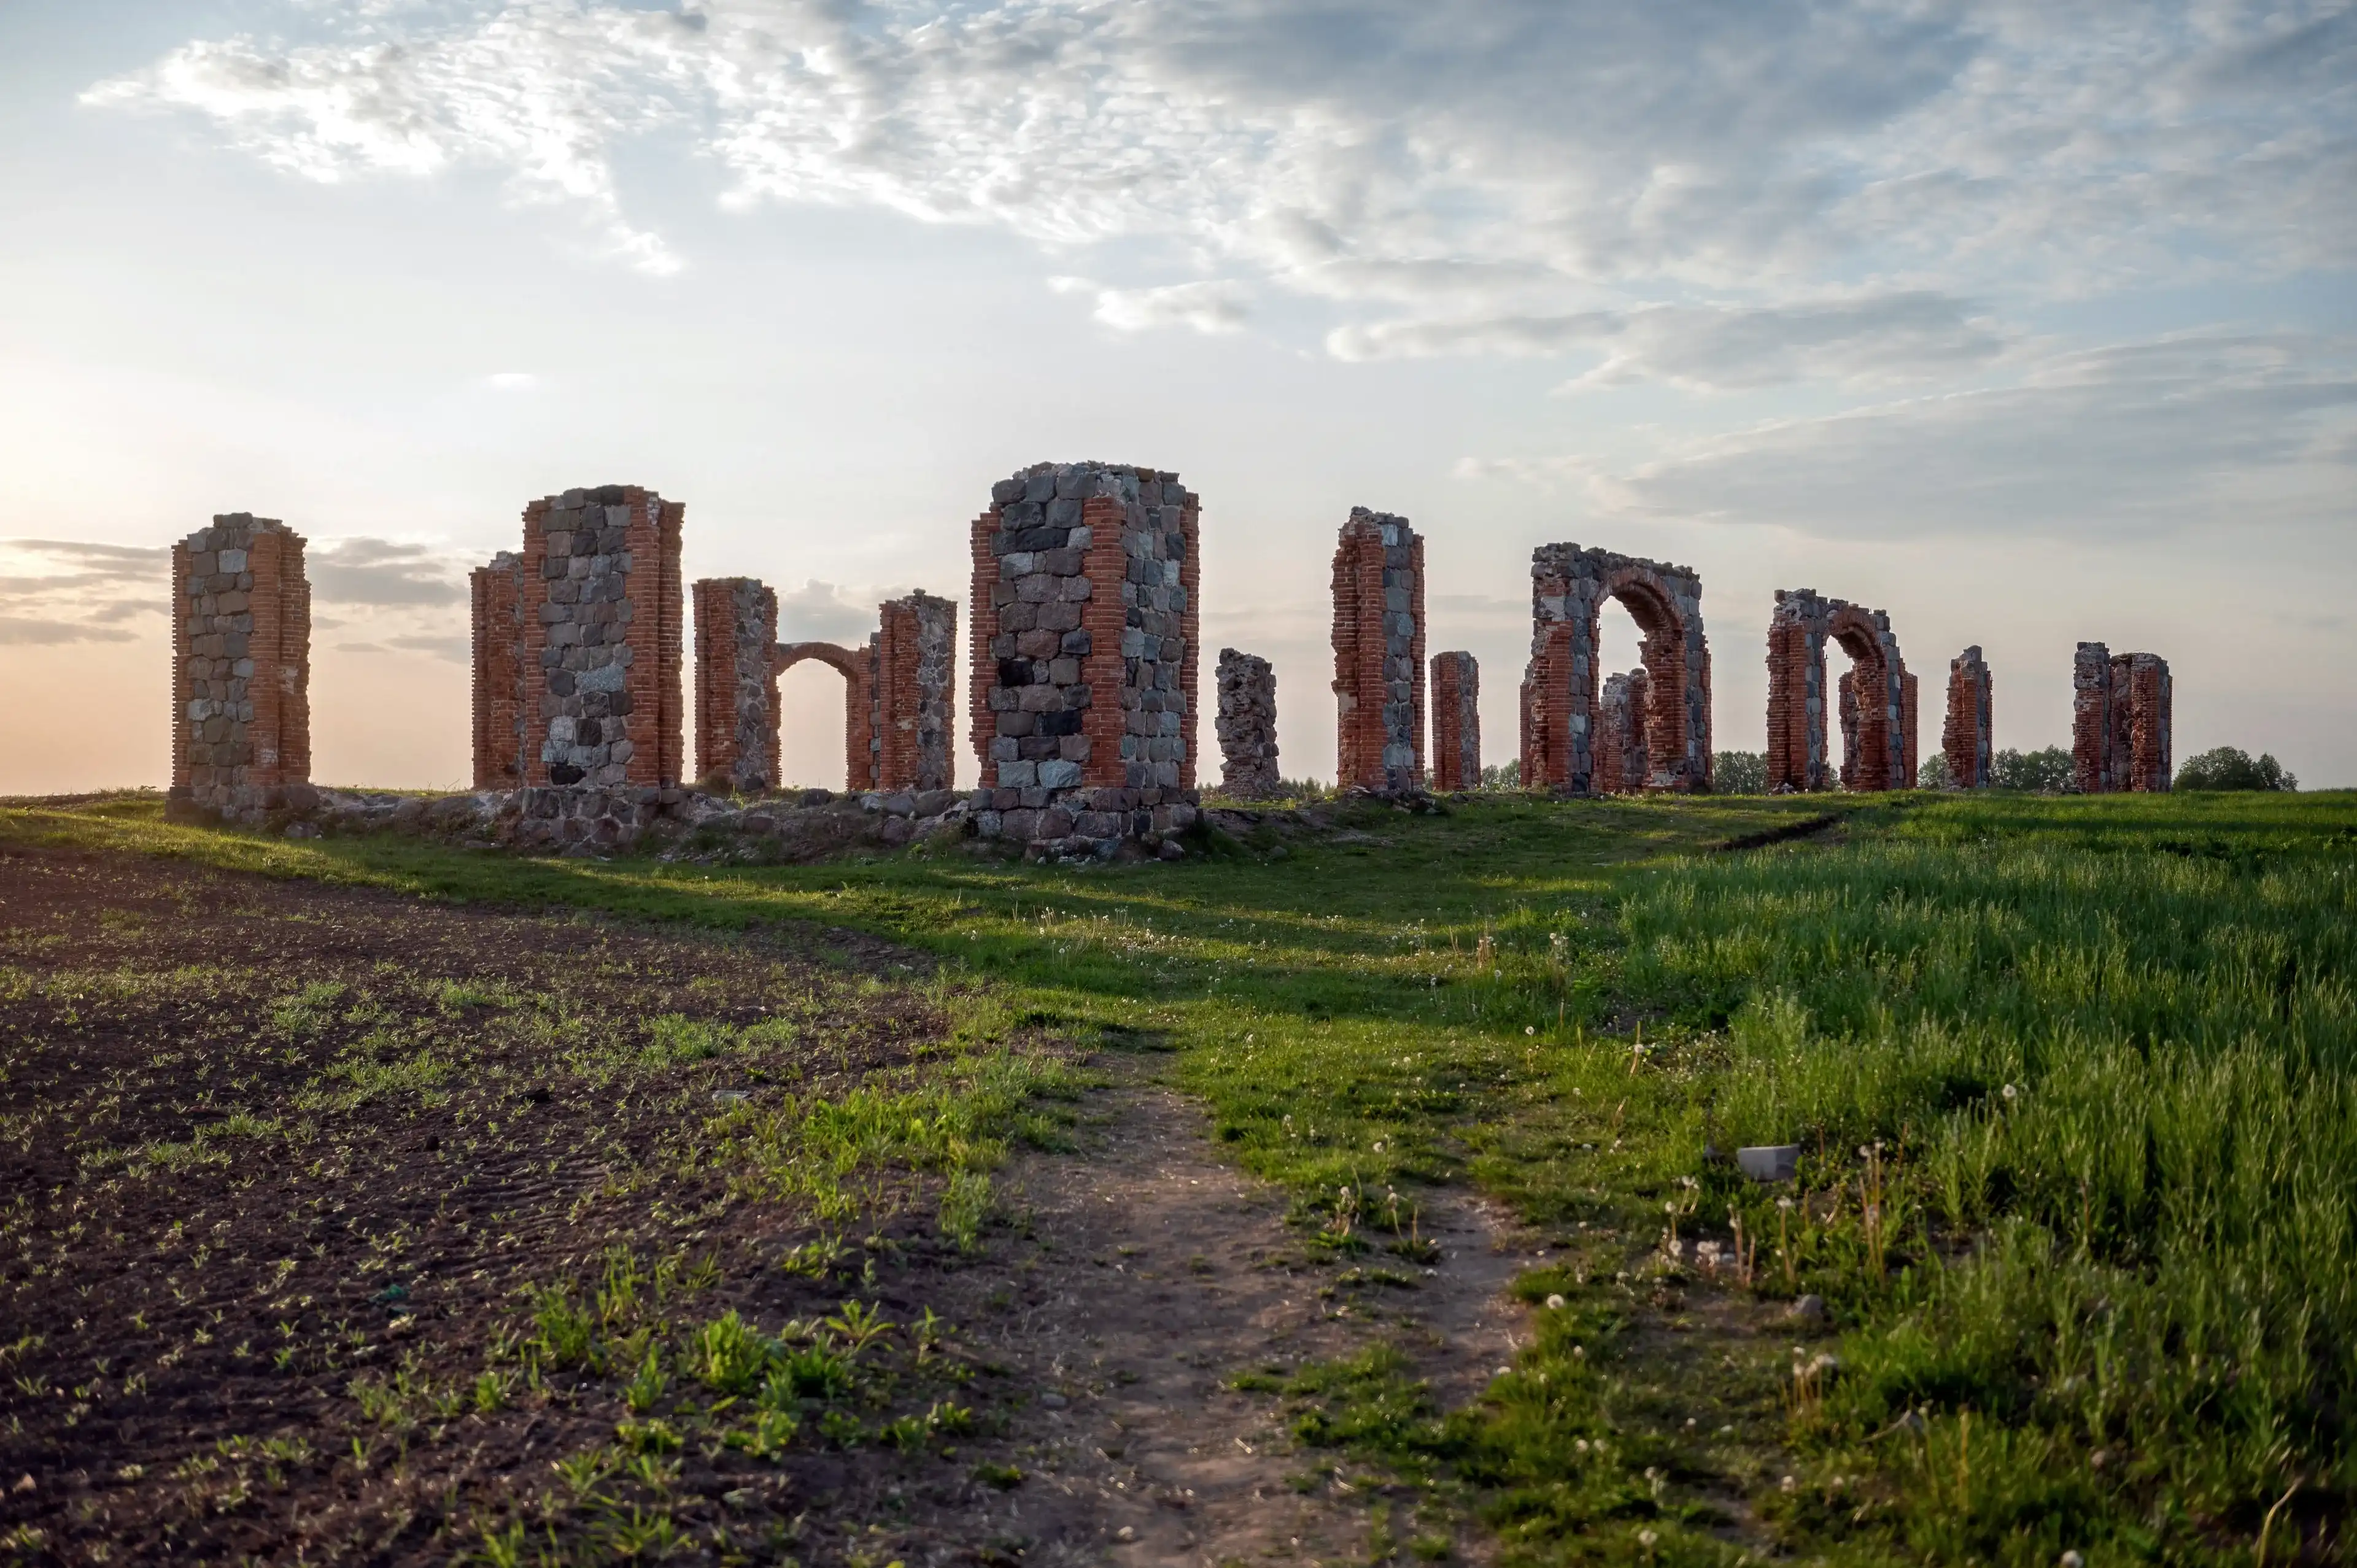 Ruins of an ancient building that looks like Stonehenge, Smiltene, Latvia